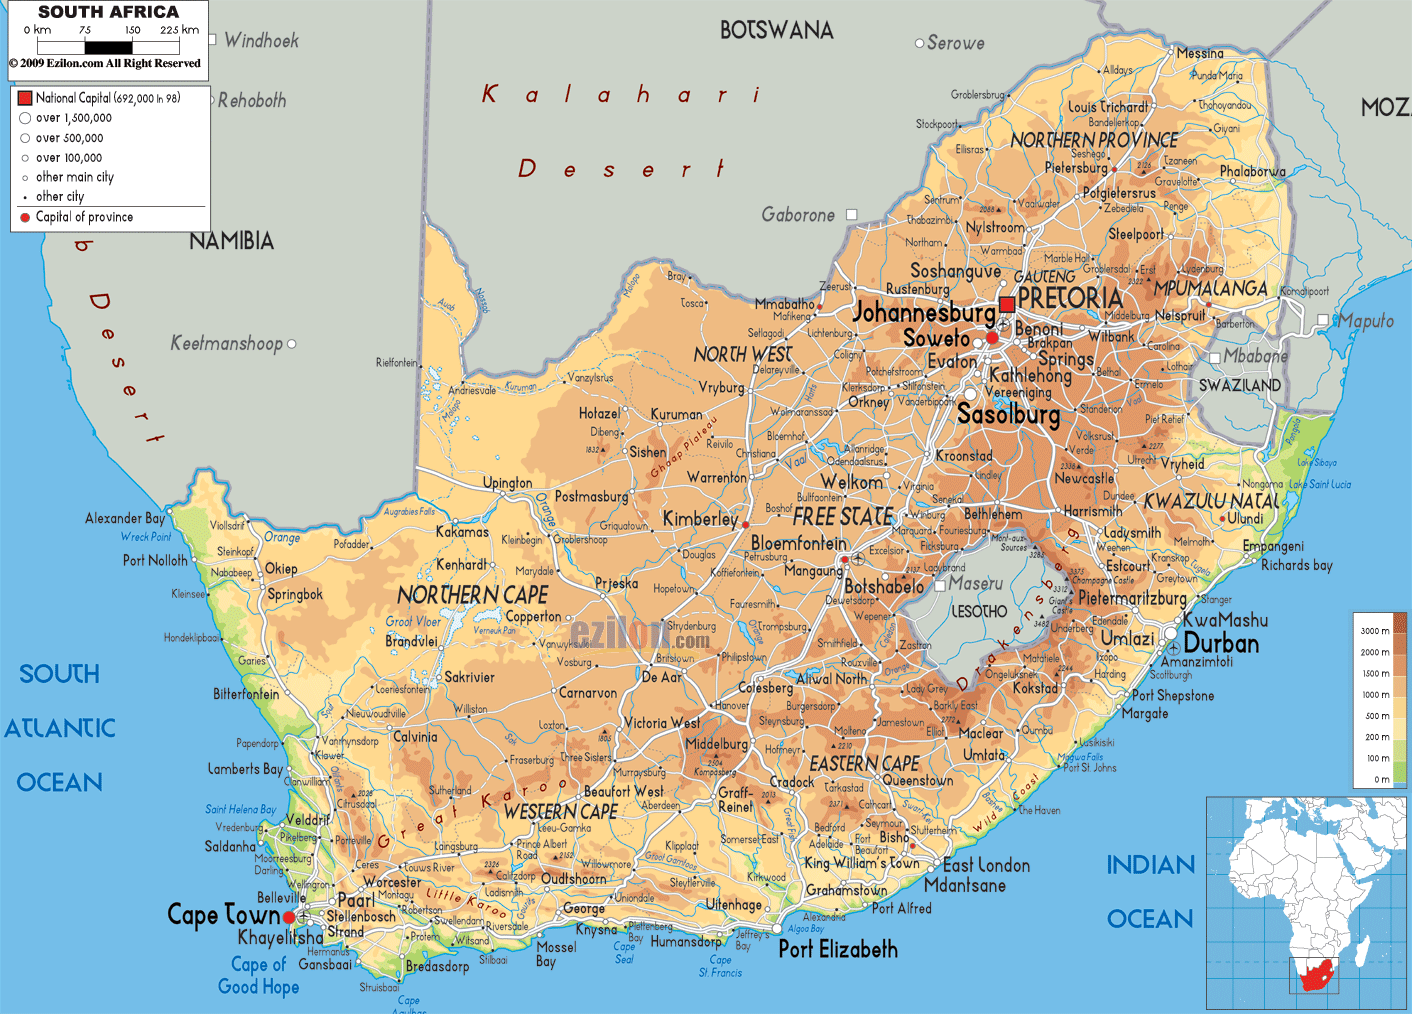 SOUTH AFRICA - GEOGRAPHICAL MAPS OF SOUTH AFRICA